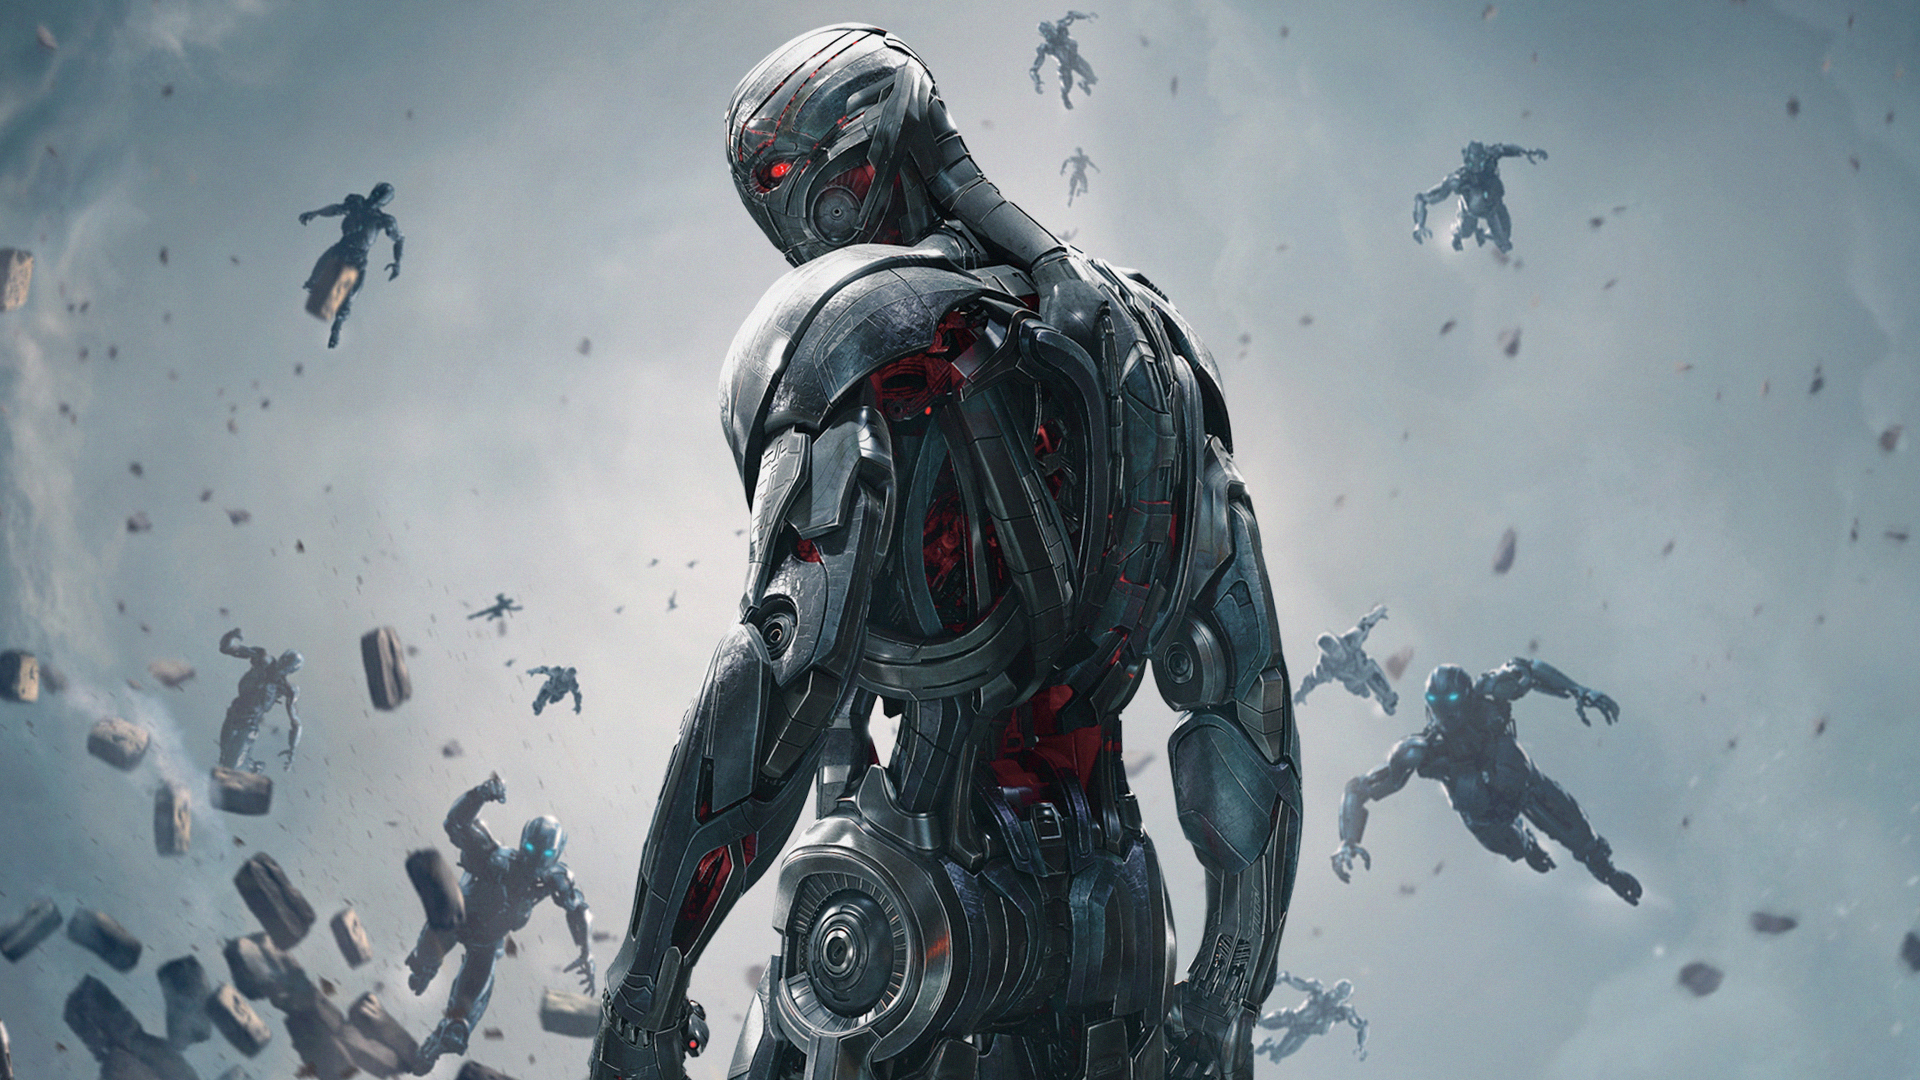 Avengers Age Of Ultron Wallpaper 1920x1080 by sachso74 on